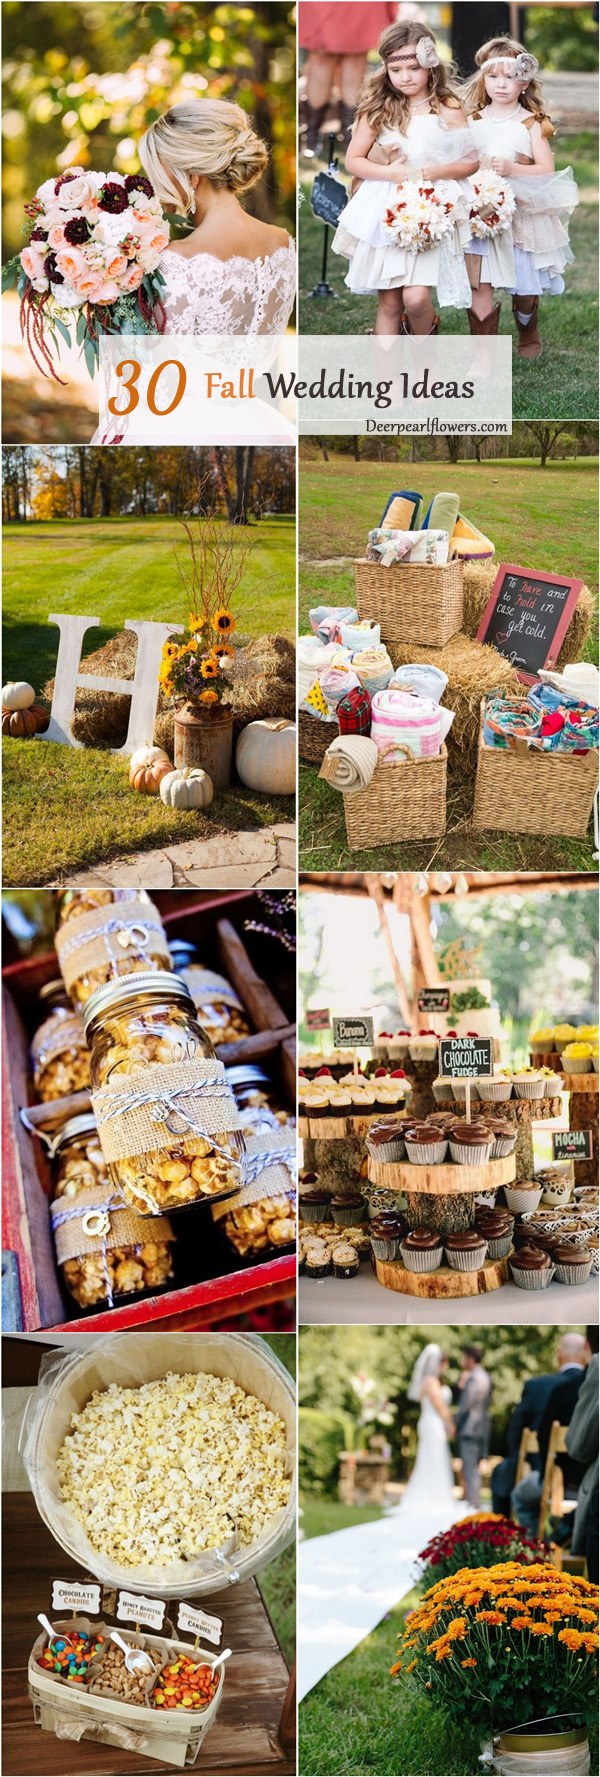 outdoor fall wedding ideas and themes